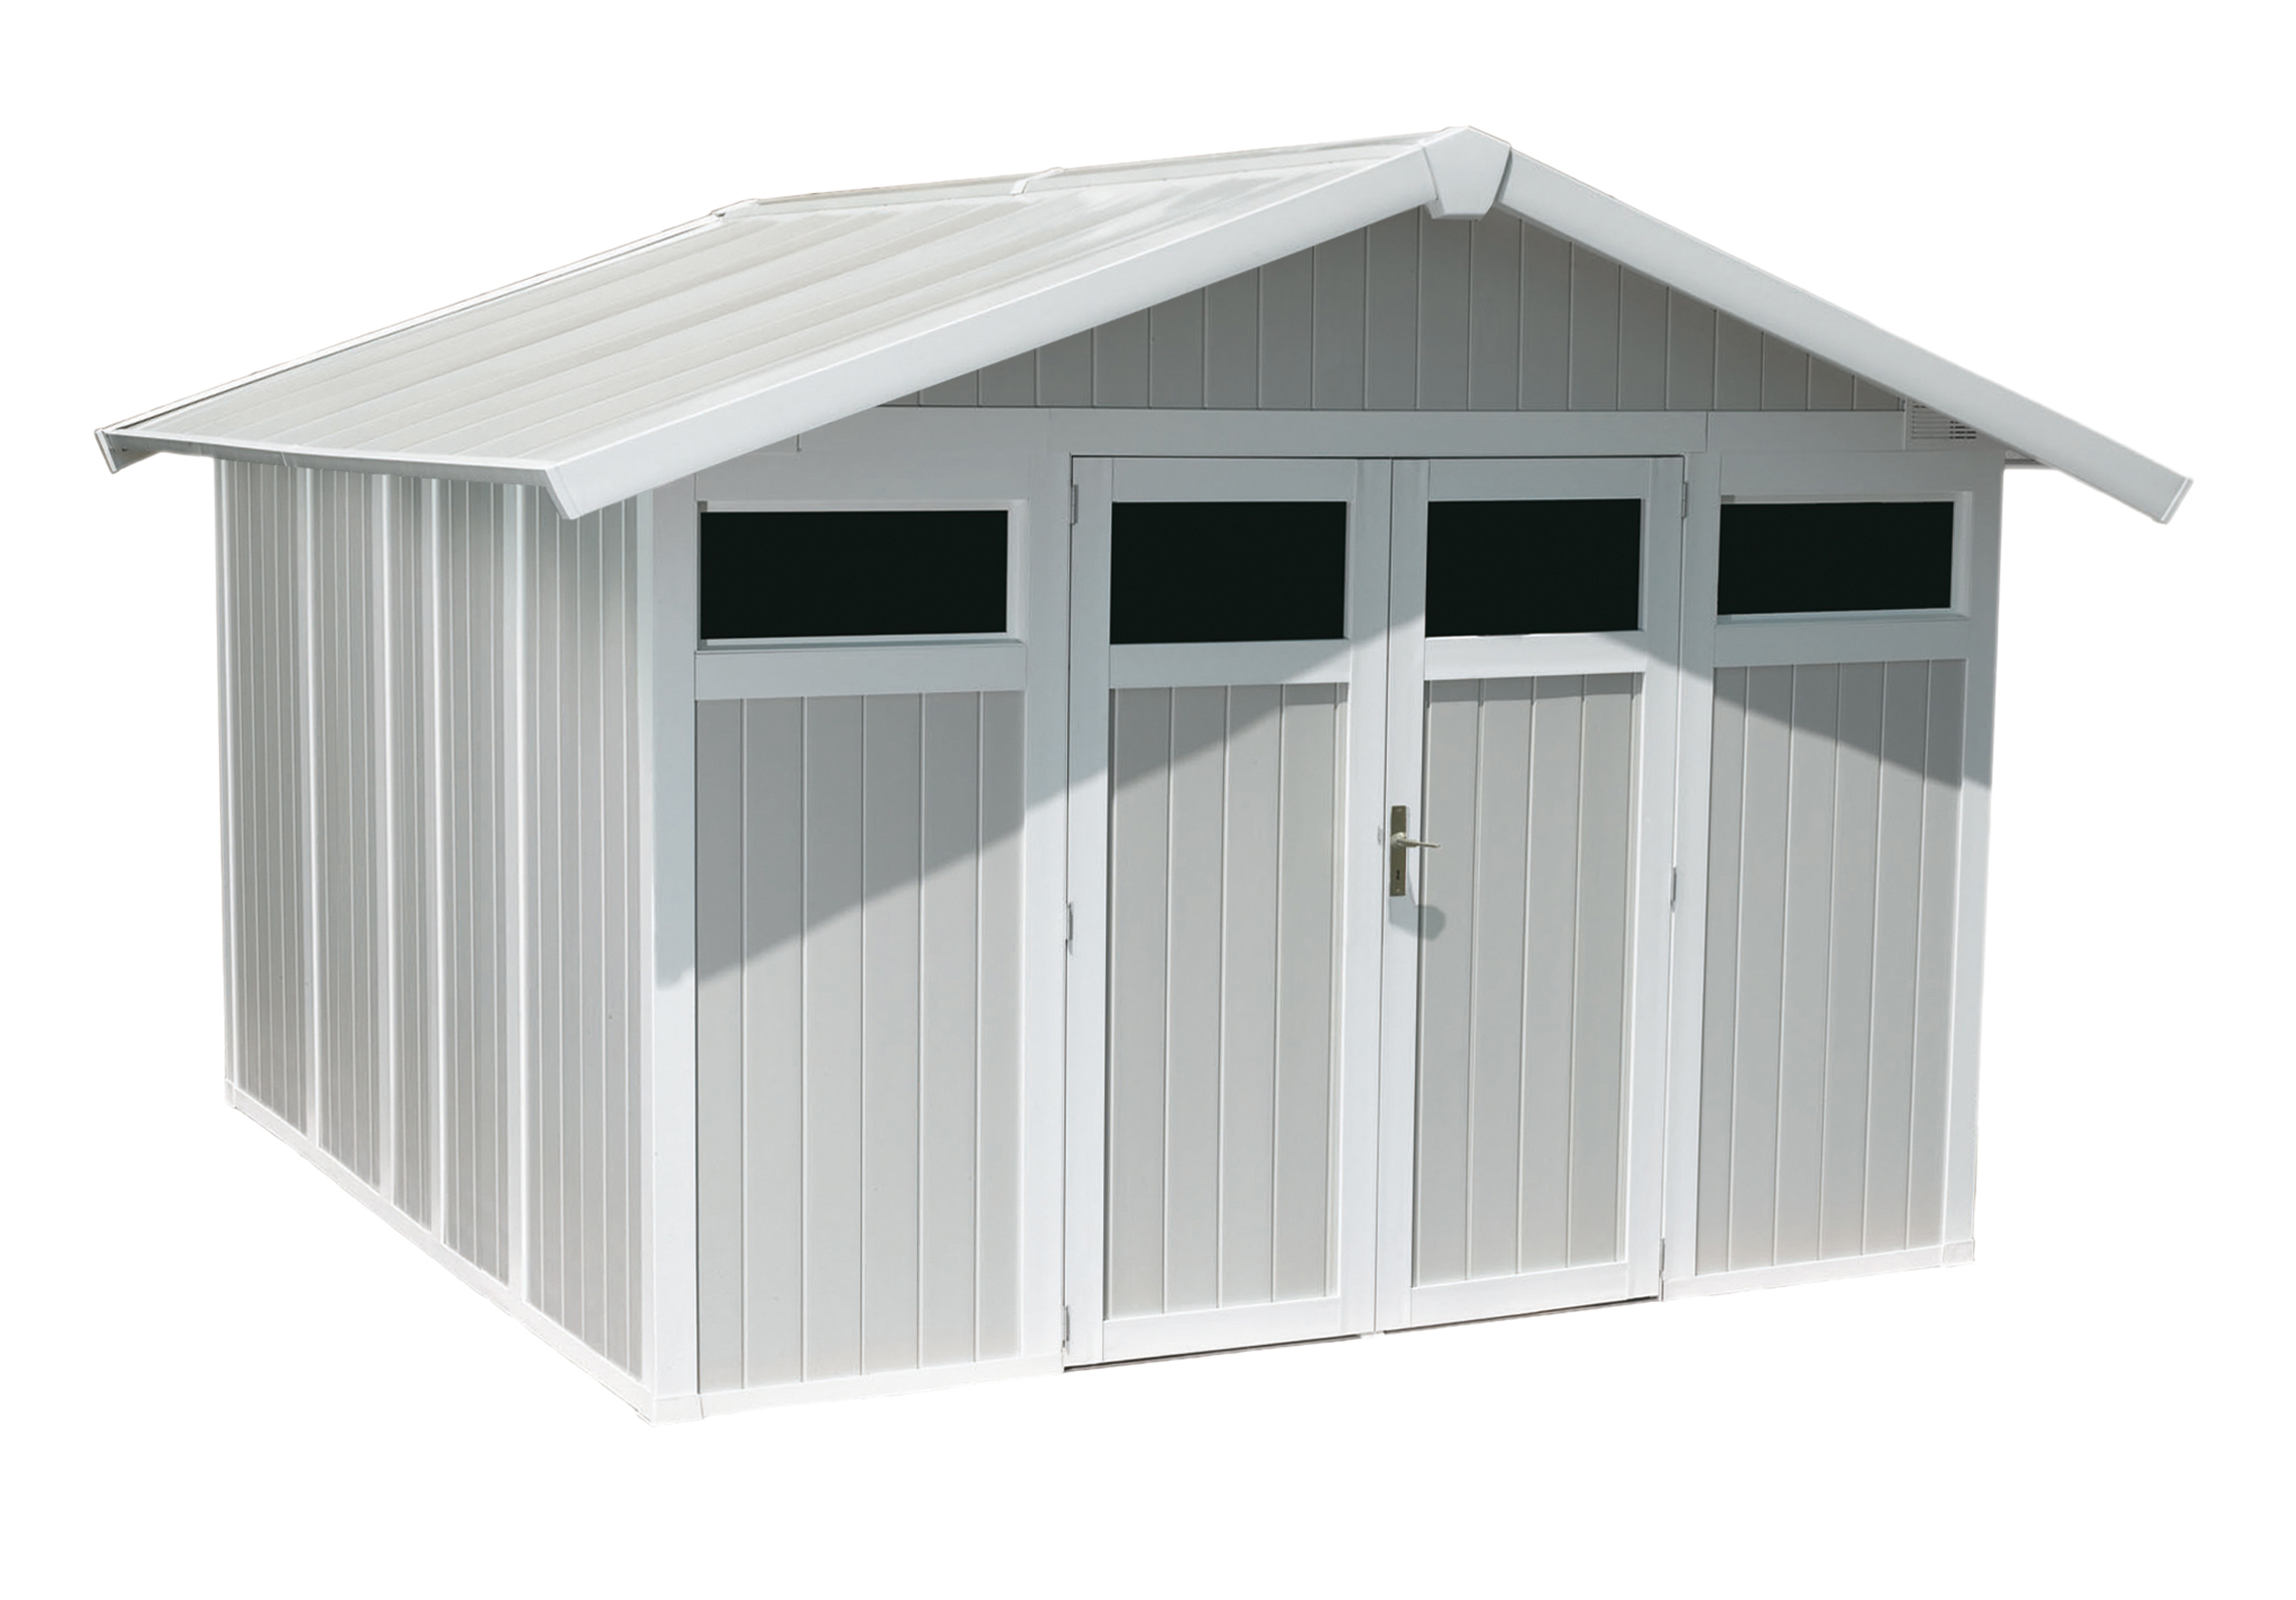 Shed Cladding Pvc Key,4x12 Shed For Sale Zara,Shed Plans 16x16 Zoom - Video...